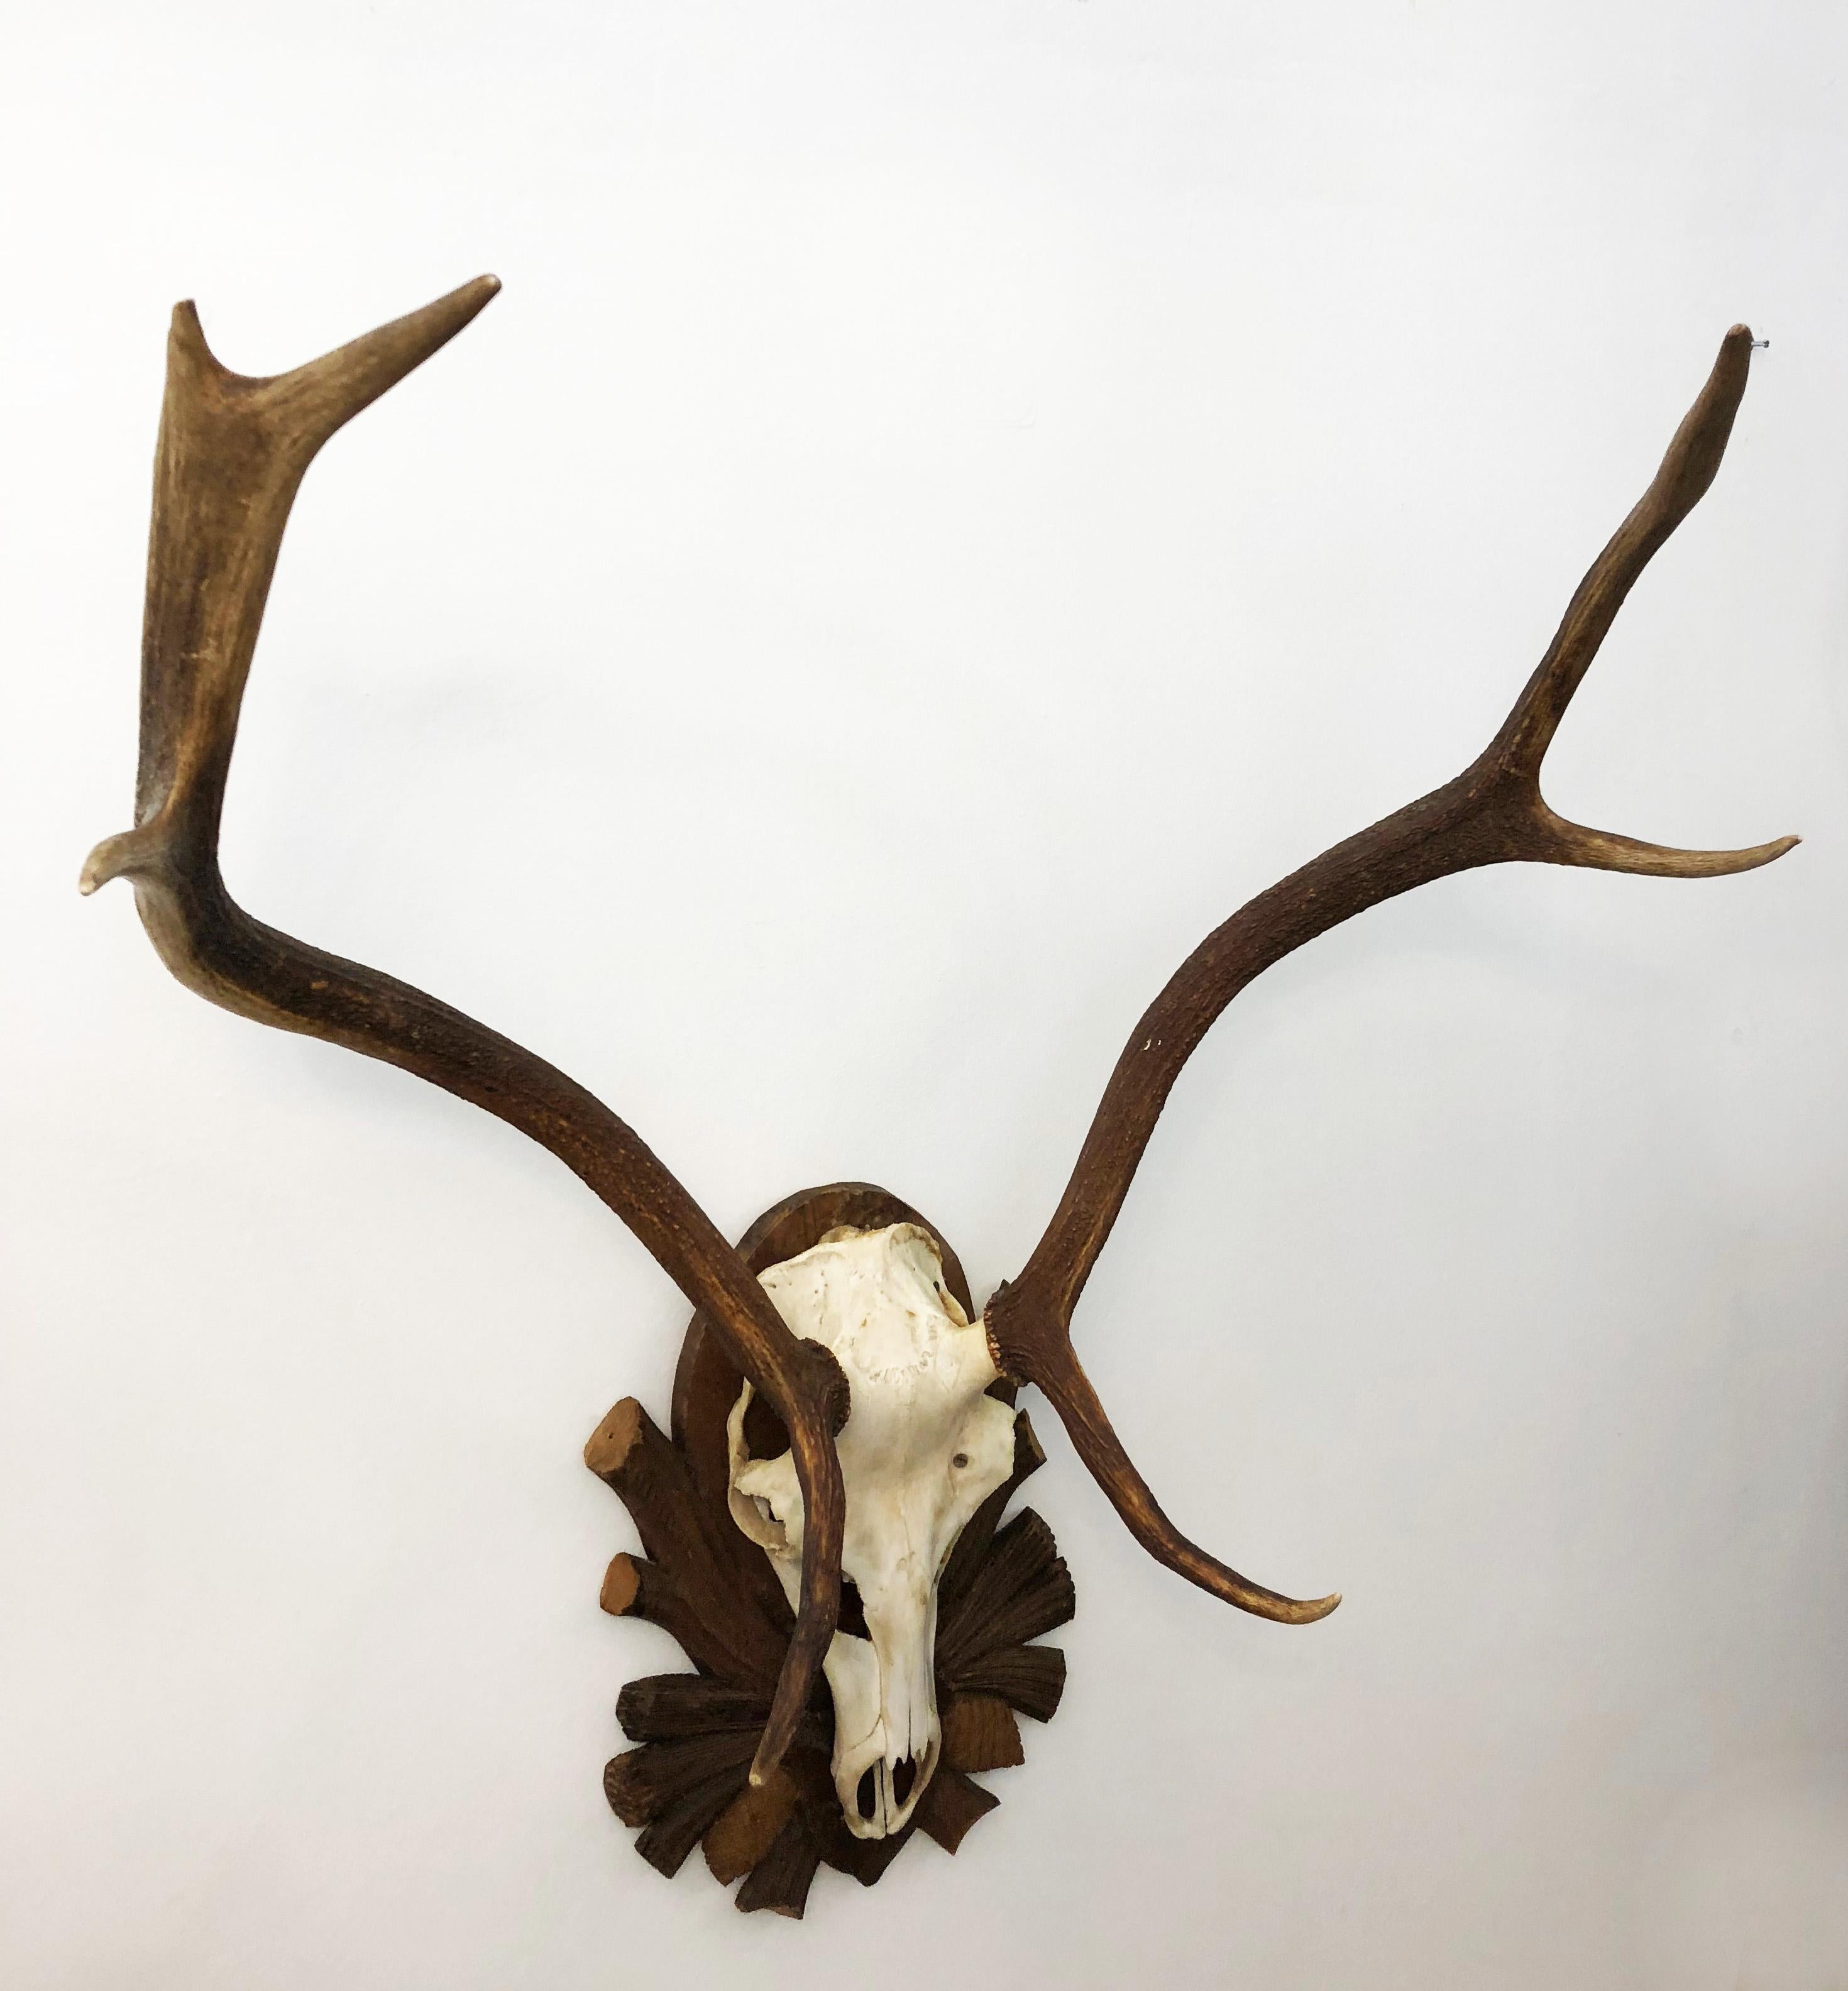 Deer trophy from the 1920s. Mounted on a wooden plaque.